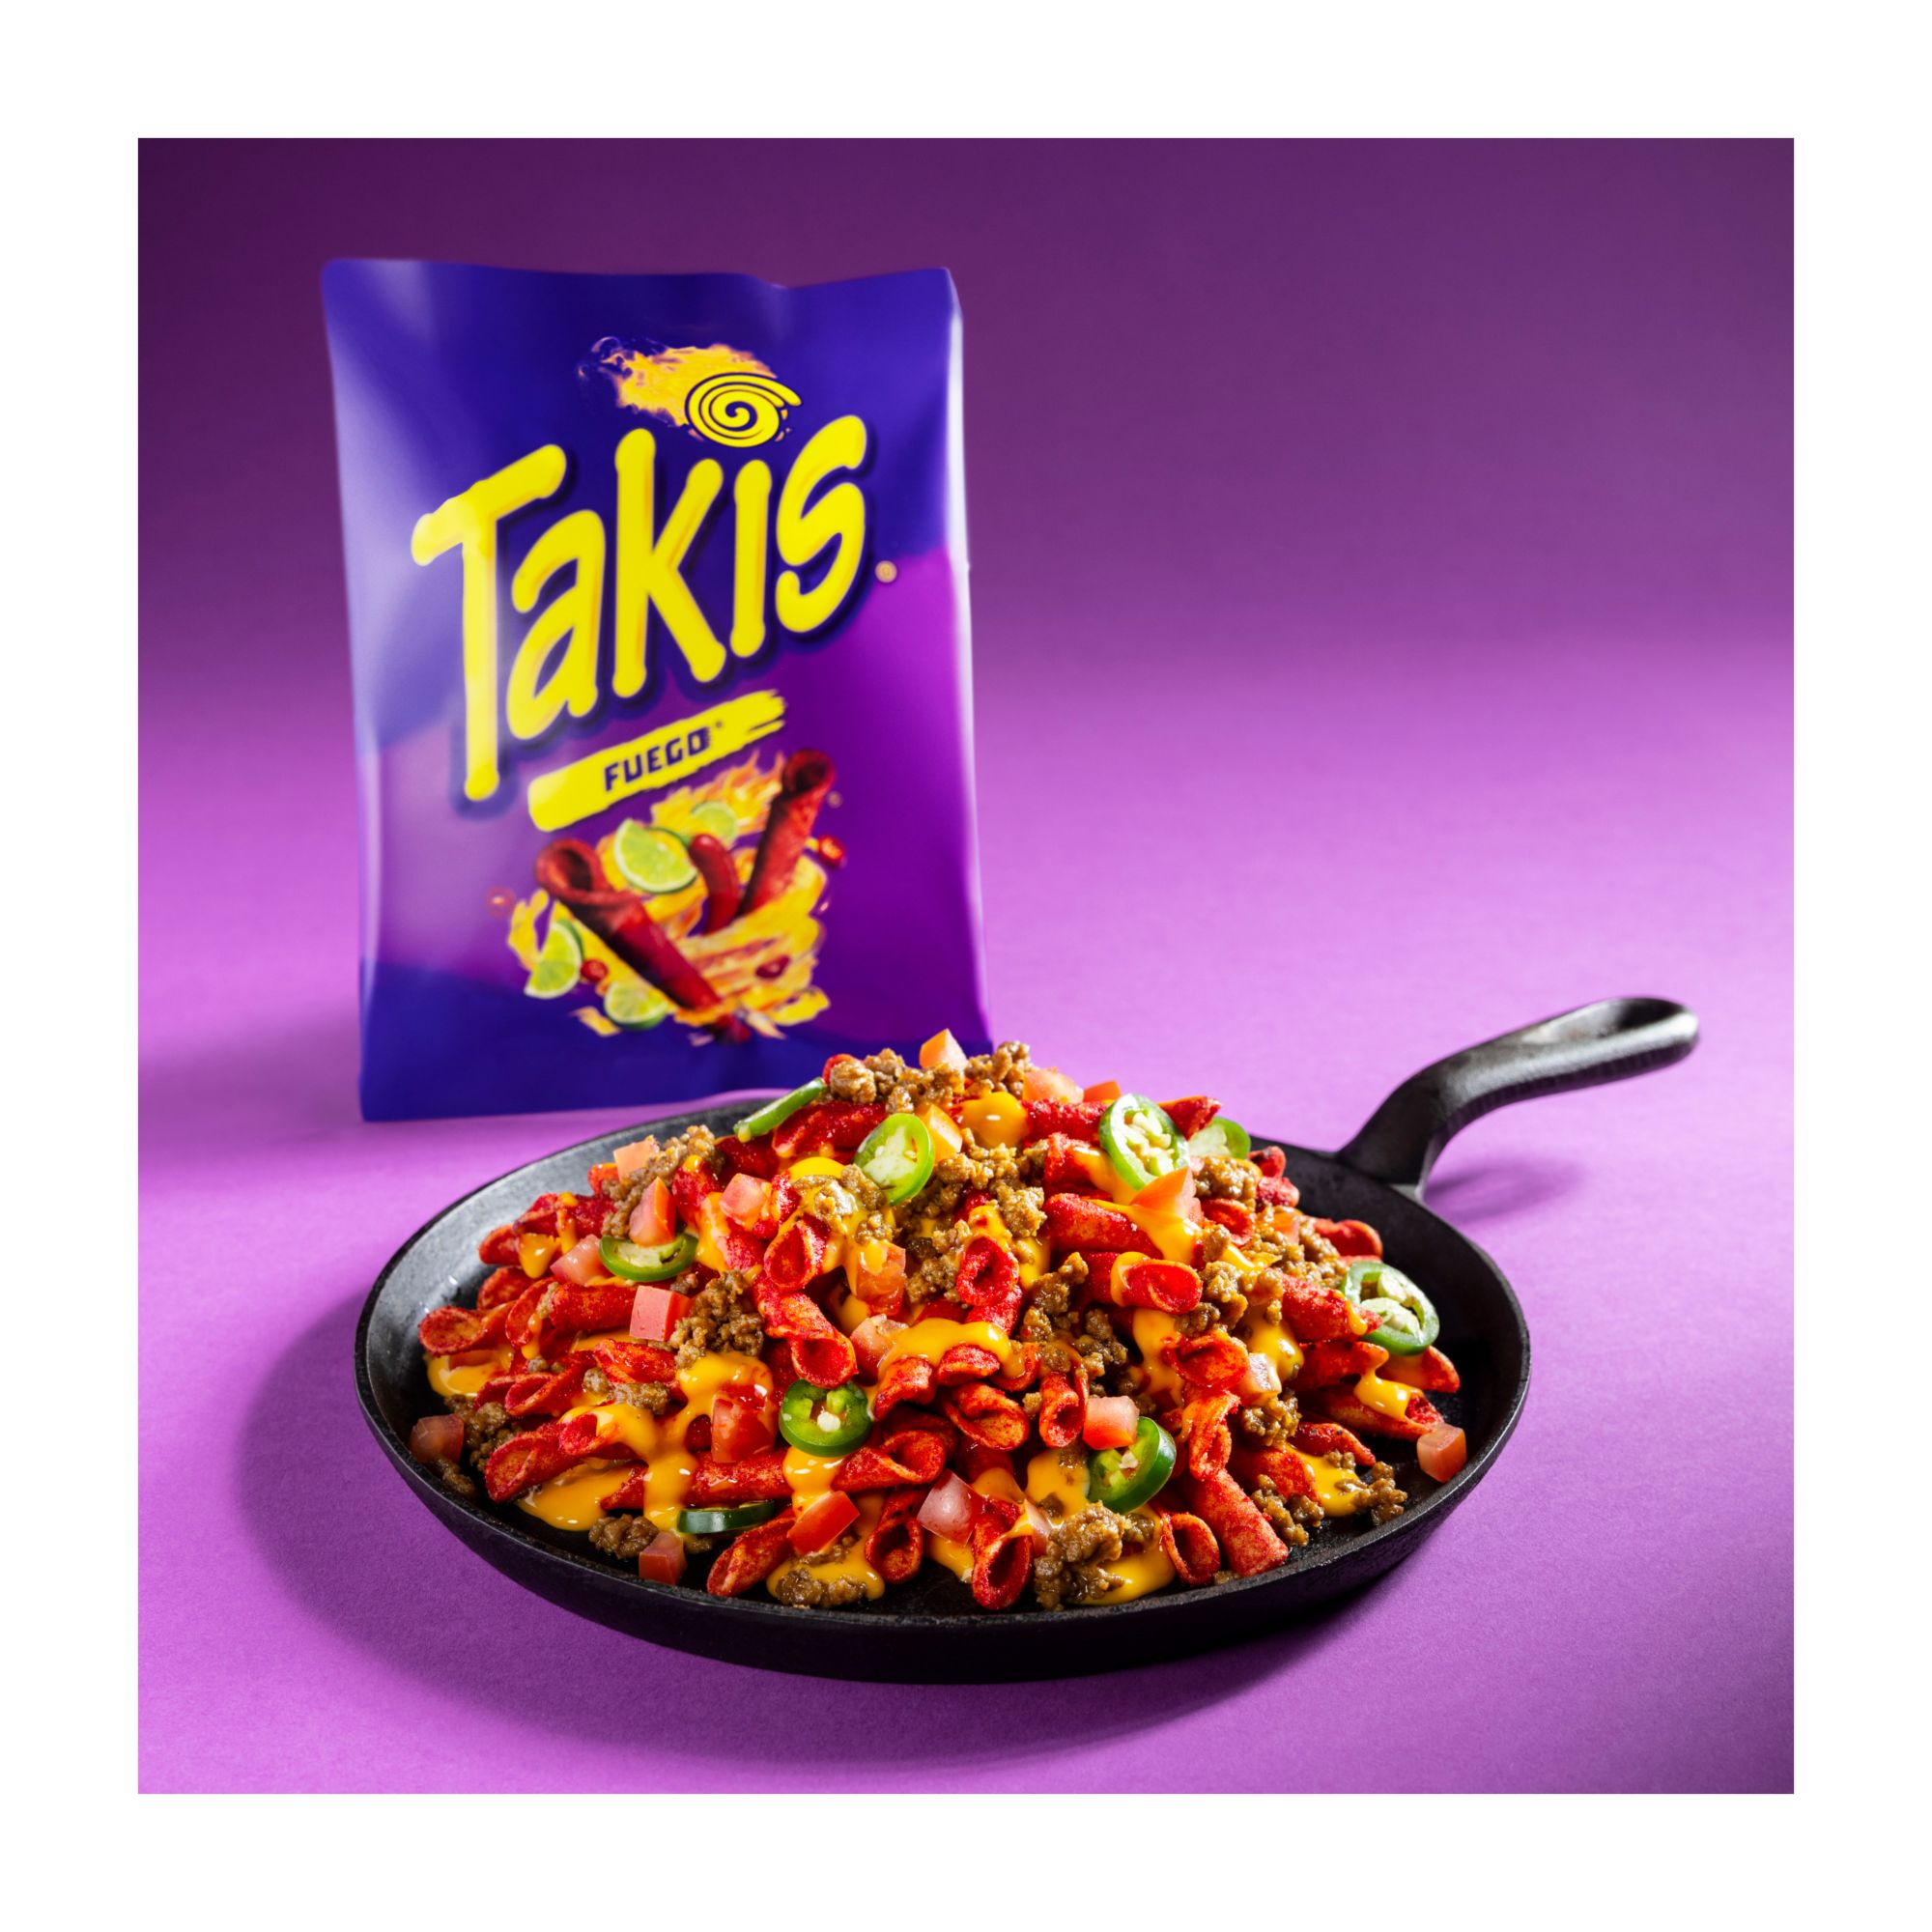 Takis 40 pc / 1 oz Variety Pack, Assorted Flavored Mixed Rolled Tortilla  Chips – (20) Fuego 1 oz, (20) Blue Heat 1 oz